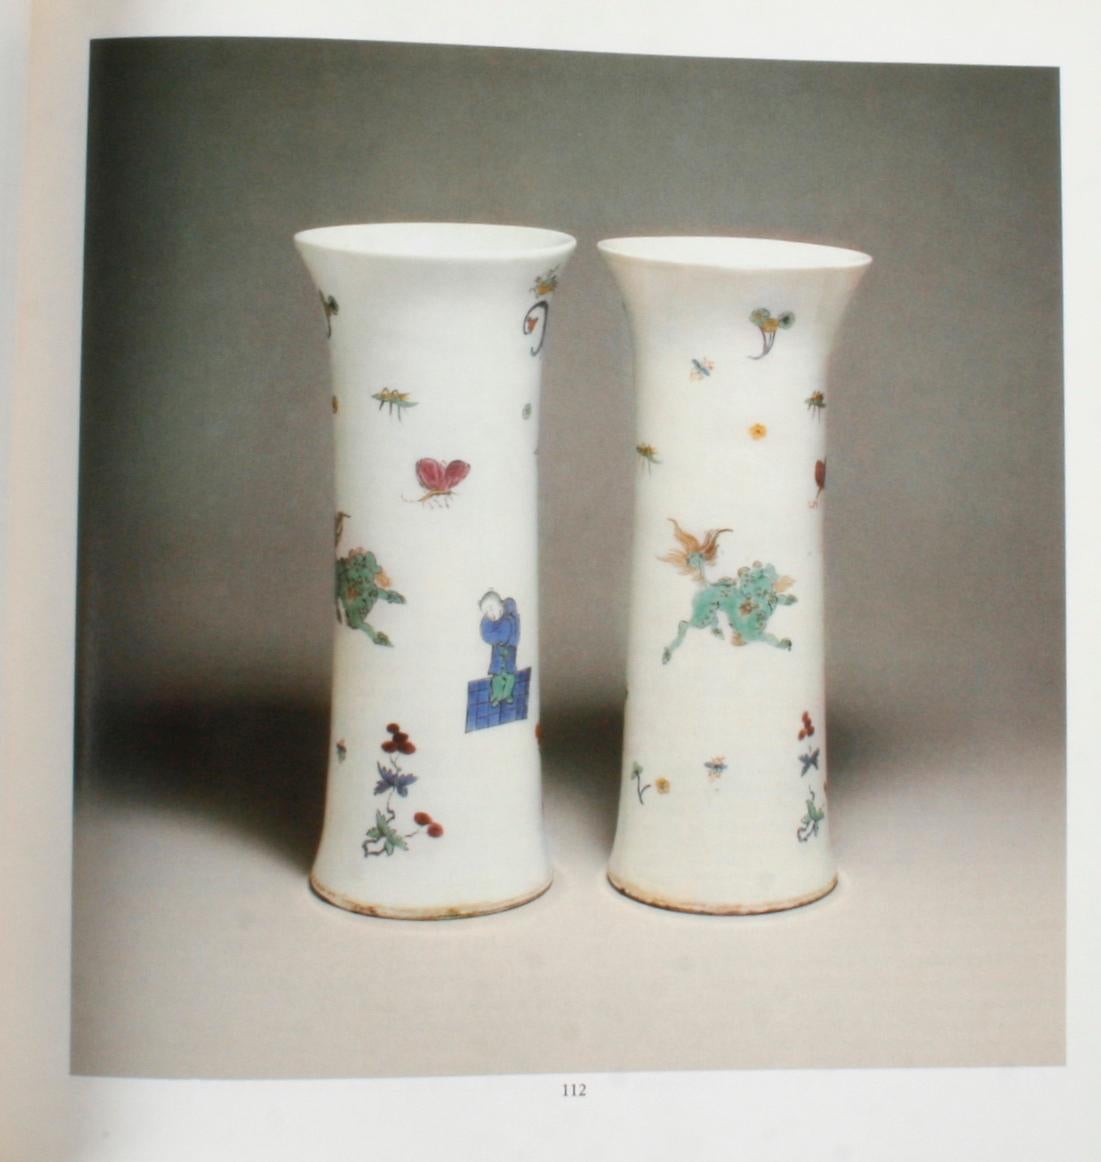 Sotheby's Auction Catalogue for The Mrs. Charles Wrightsman Palm Beach Estate 5